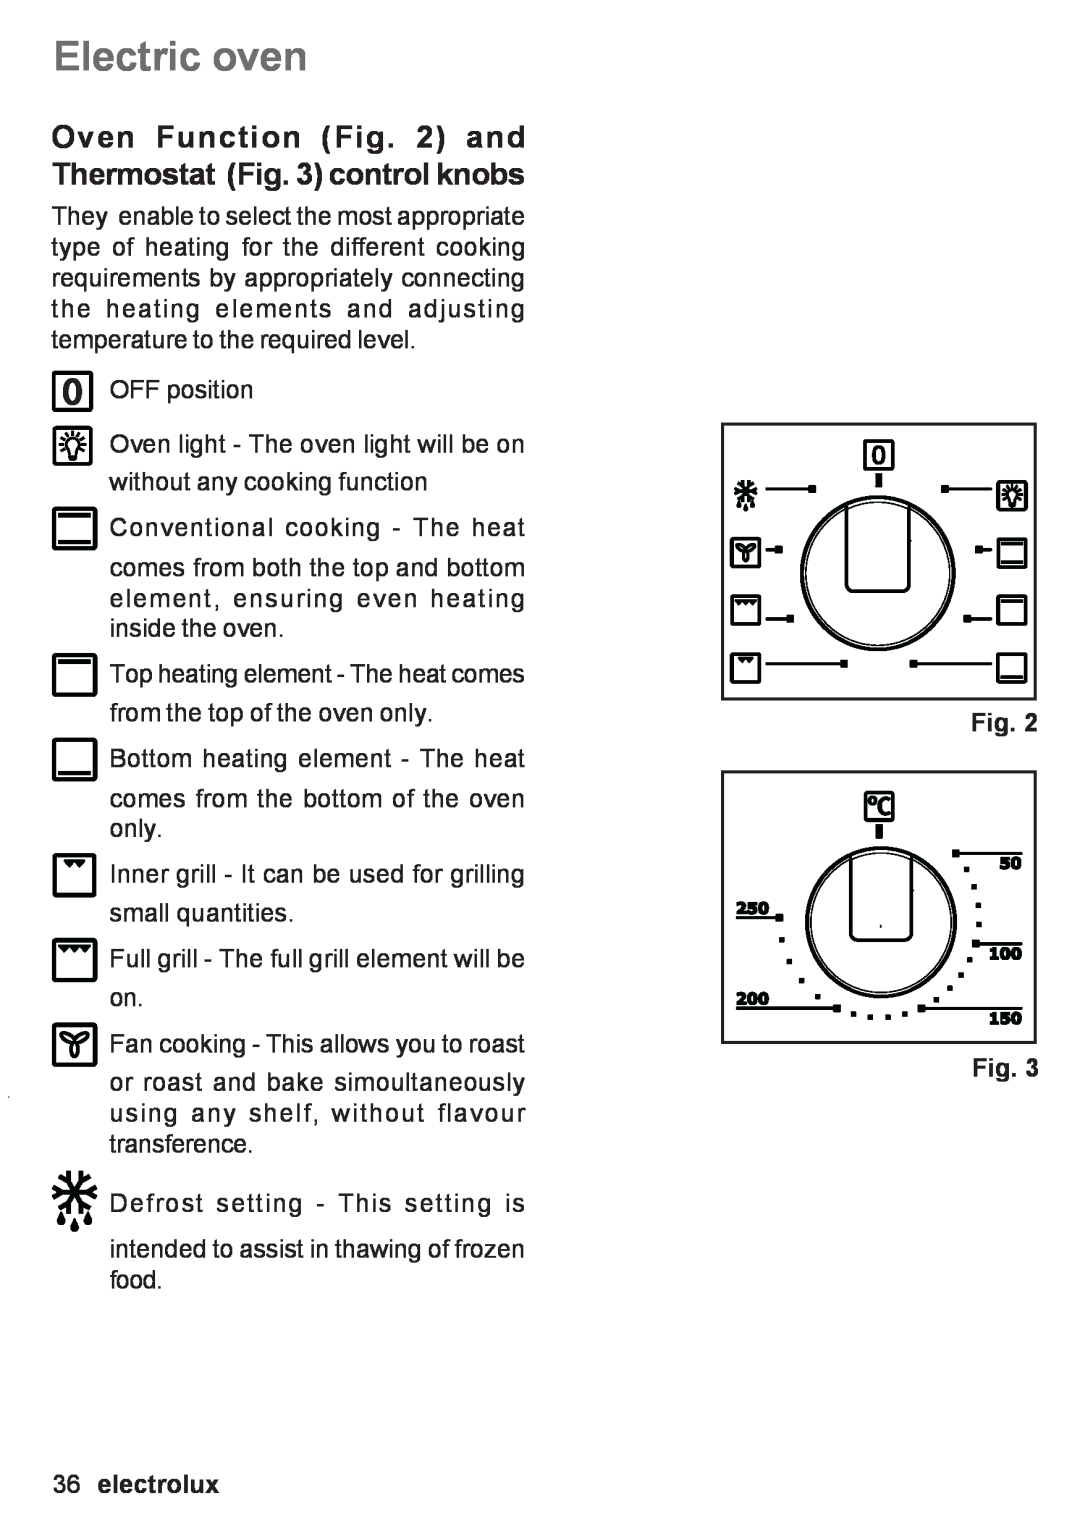 Electrolux EOB 53003 user manual Electric oven, Oven Function and Thermostat control knobs, electrolux 